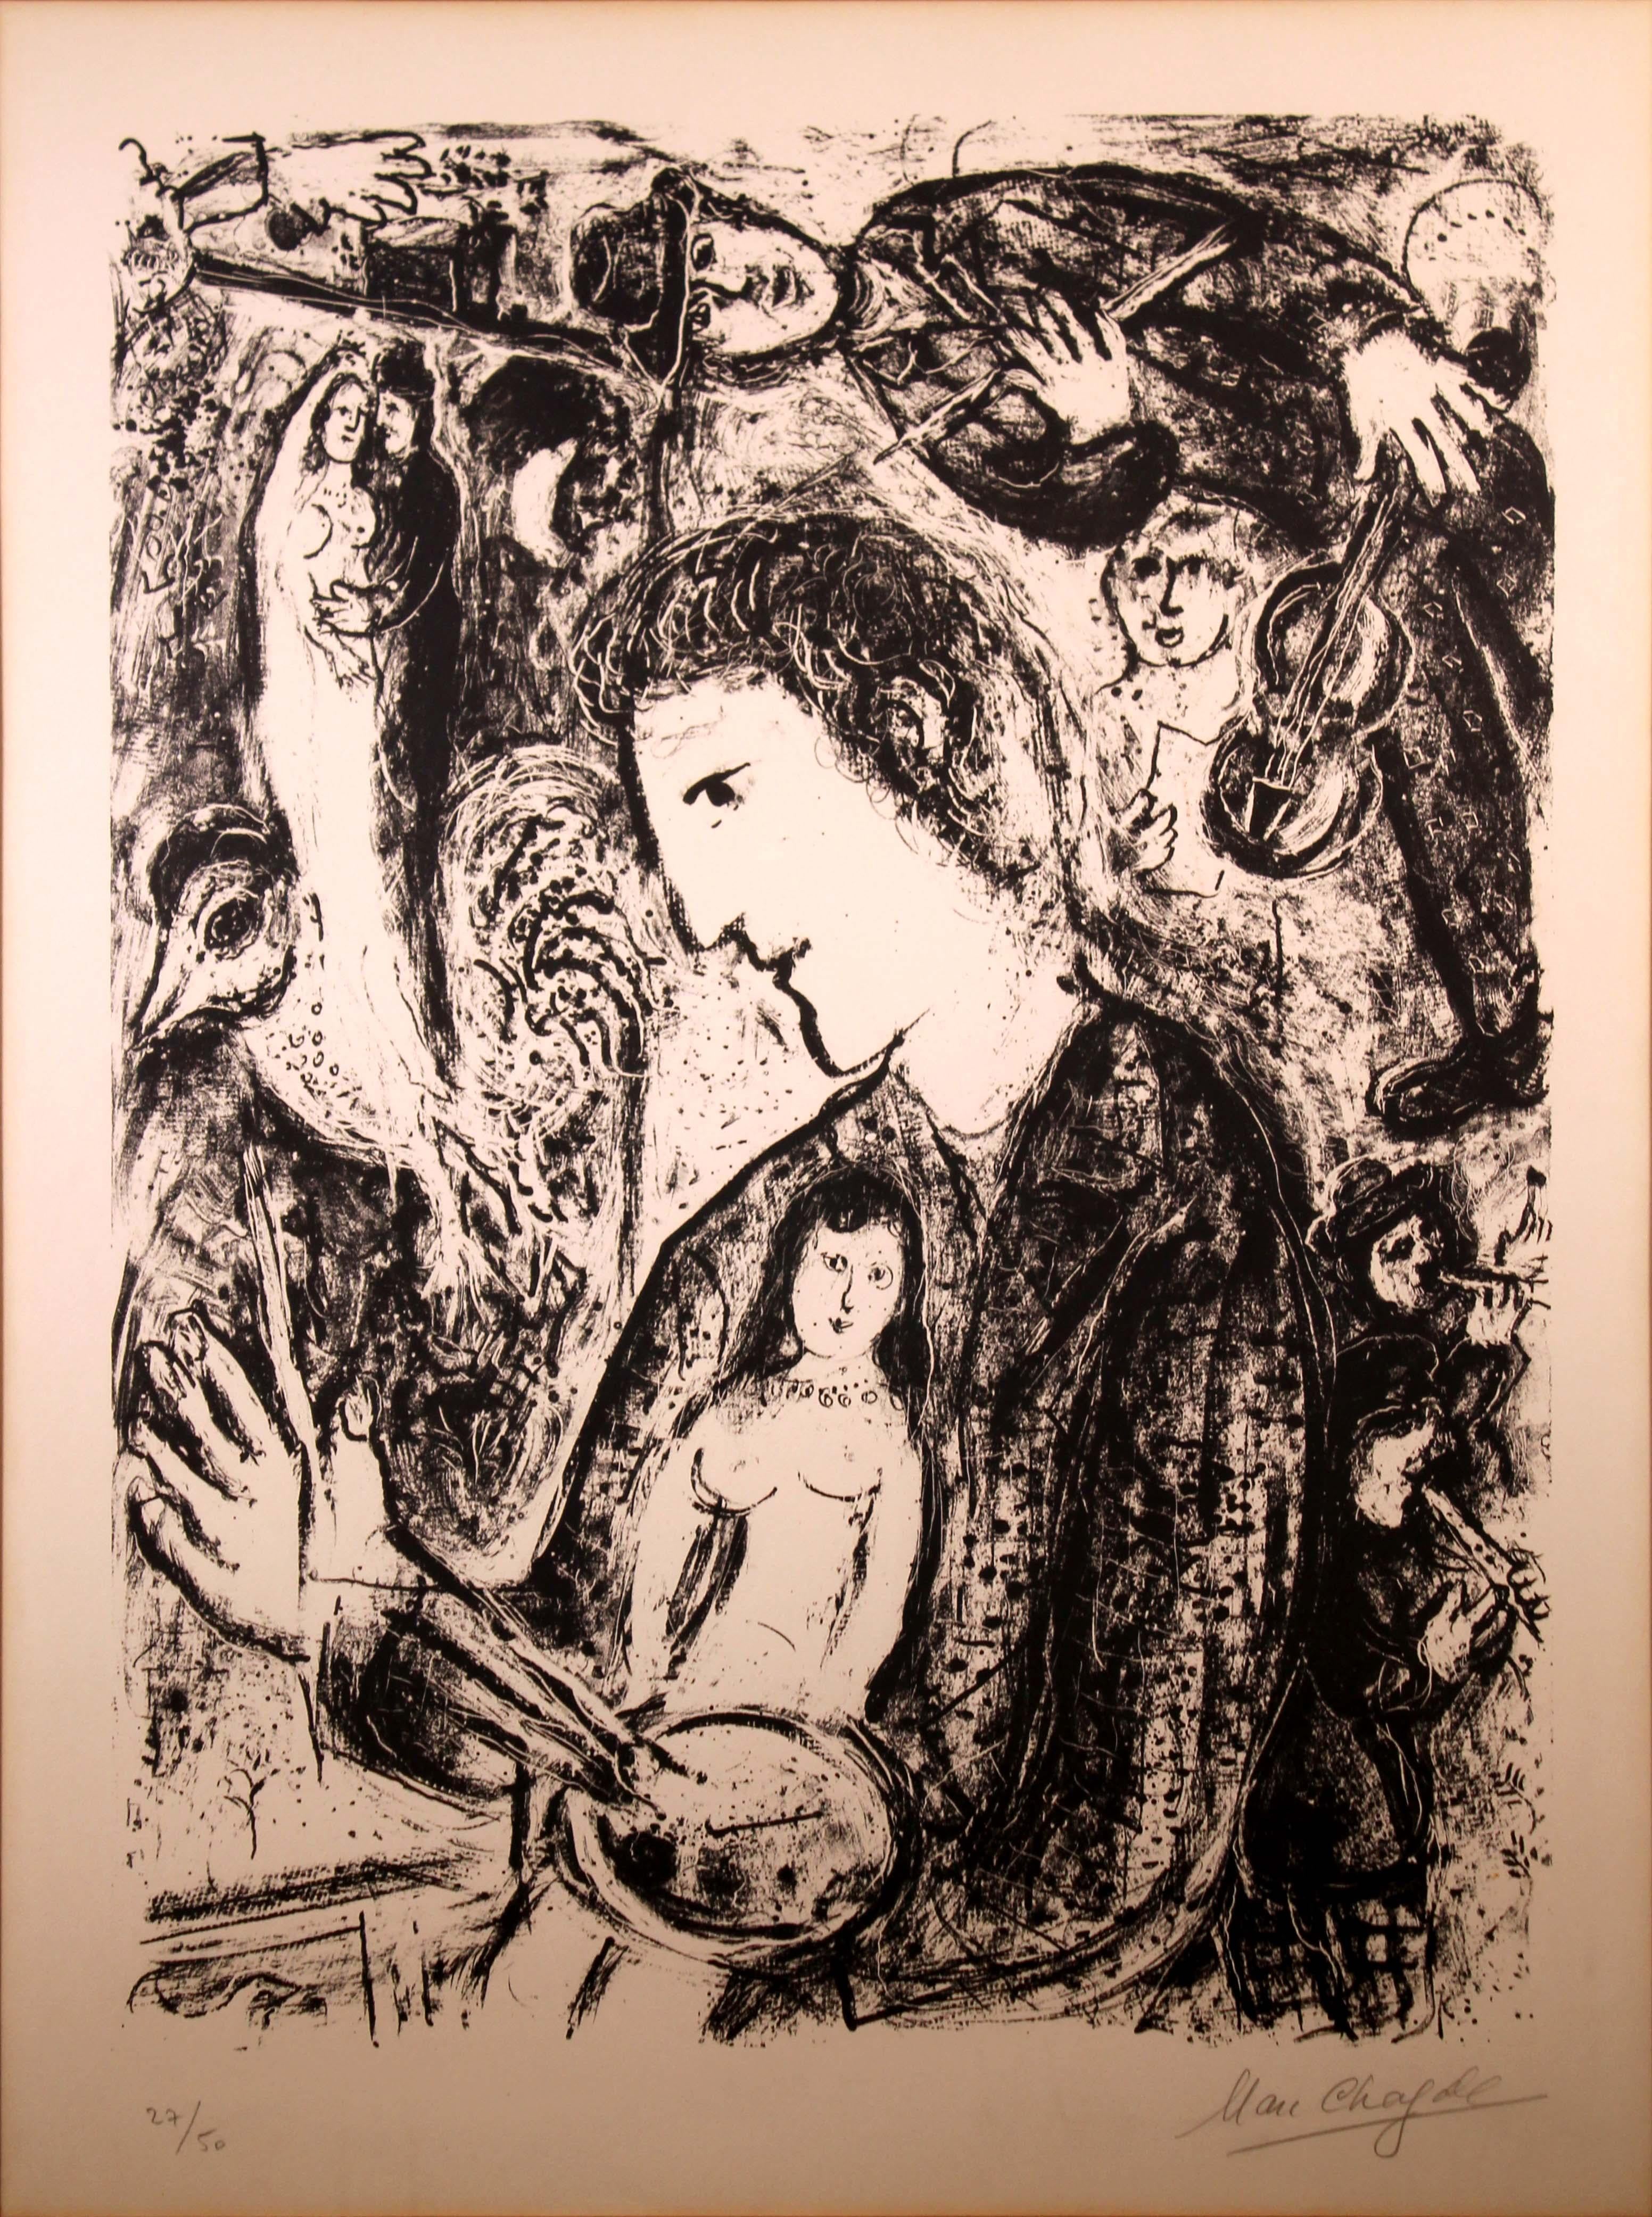 A sought-after and desirable modern lithograph titled “Self Portrait” by Jewish-French artist Marc Chagall. This artwork showcases Chagall’s signature romantic subject matter featuring his wife Bella and the iconic floating figures. Hand signed in